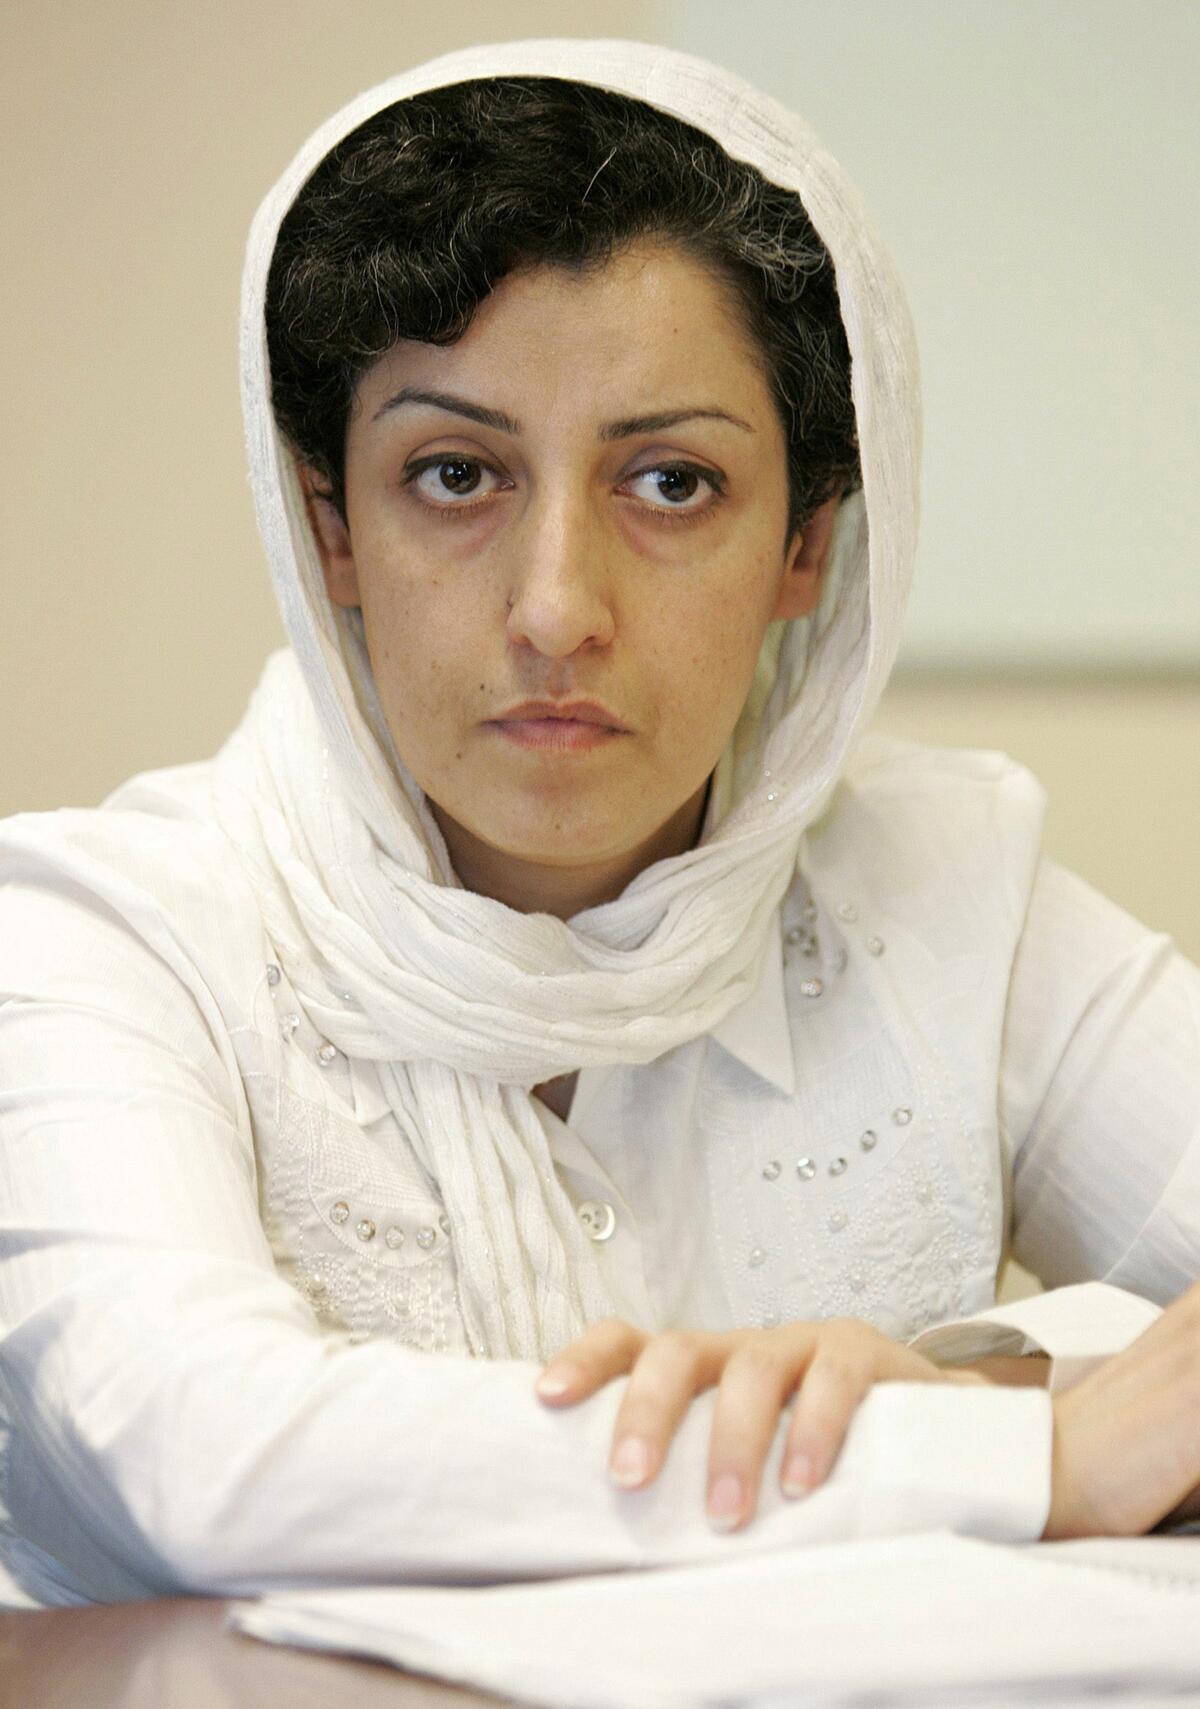 Narges Mohammadi listens with her arms rested on a table.